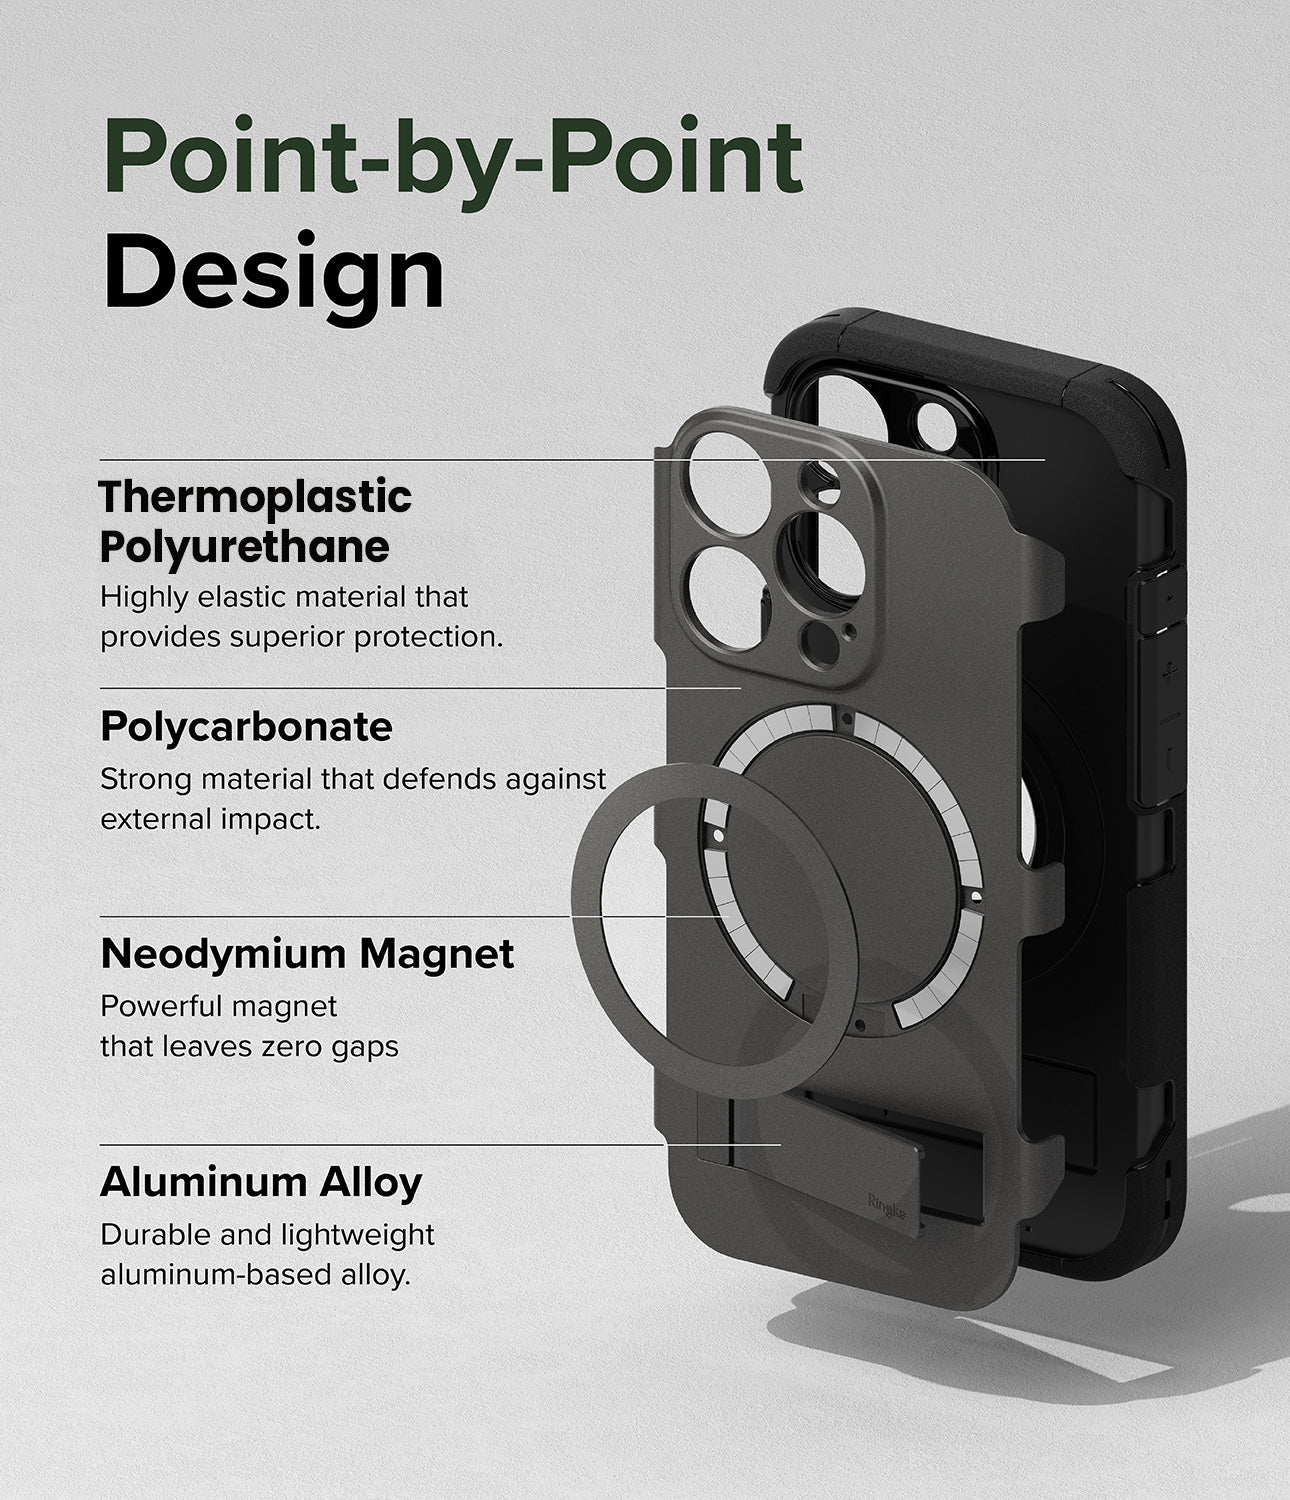 iPhone 15 Pro Case | Alles - Gun Metal - Point-By-Point Design. Highly elastic material that provides superior protection with Thermoplastic Polyurethane. Strong material that defends against external impact with Polycarbonate. Neodymium Magnet for powerful magnet that leaves zero gaps. Durable and lightweight aluminum-based alloy.